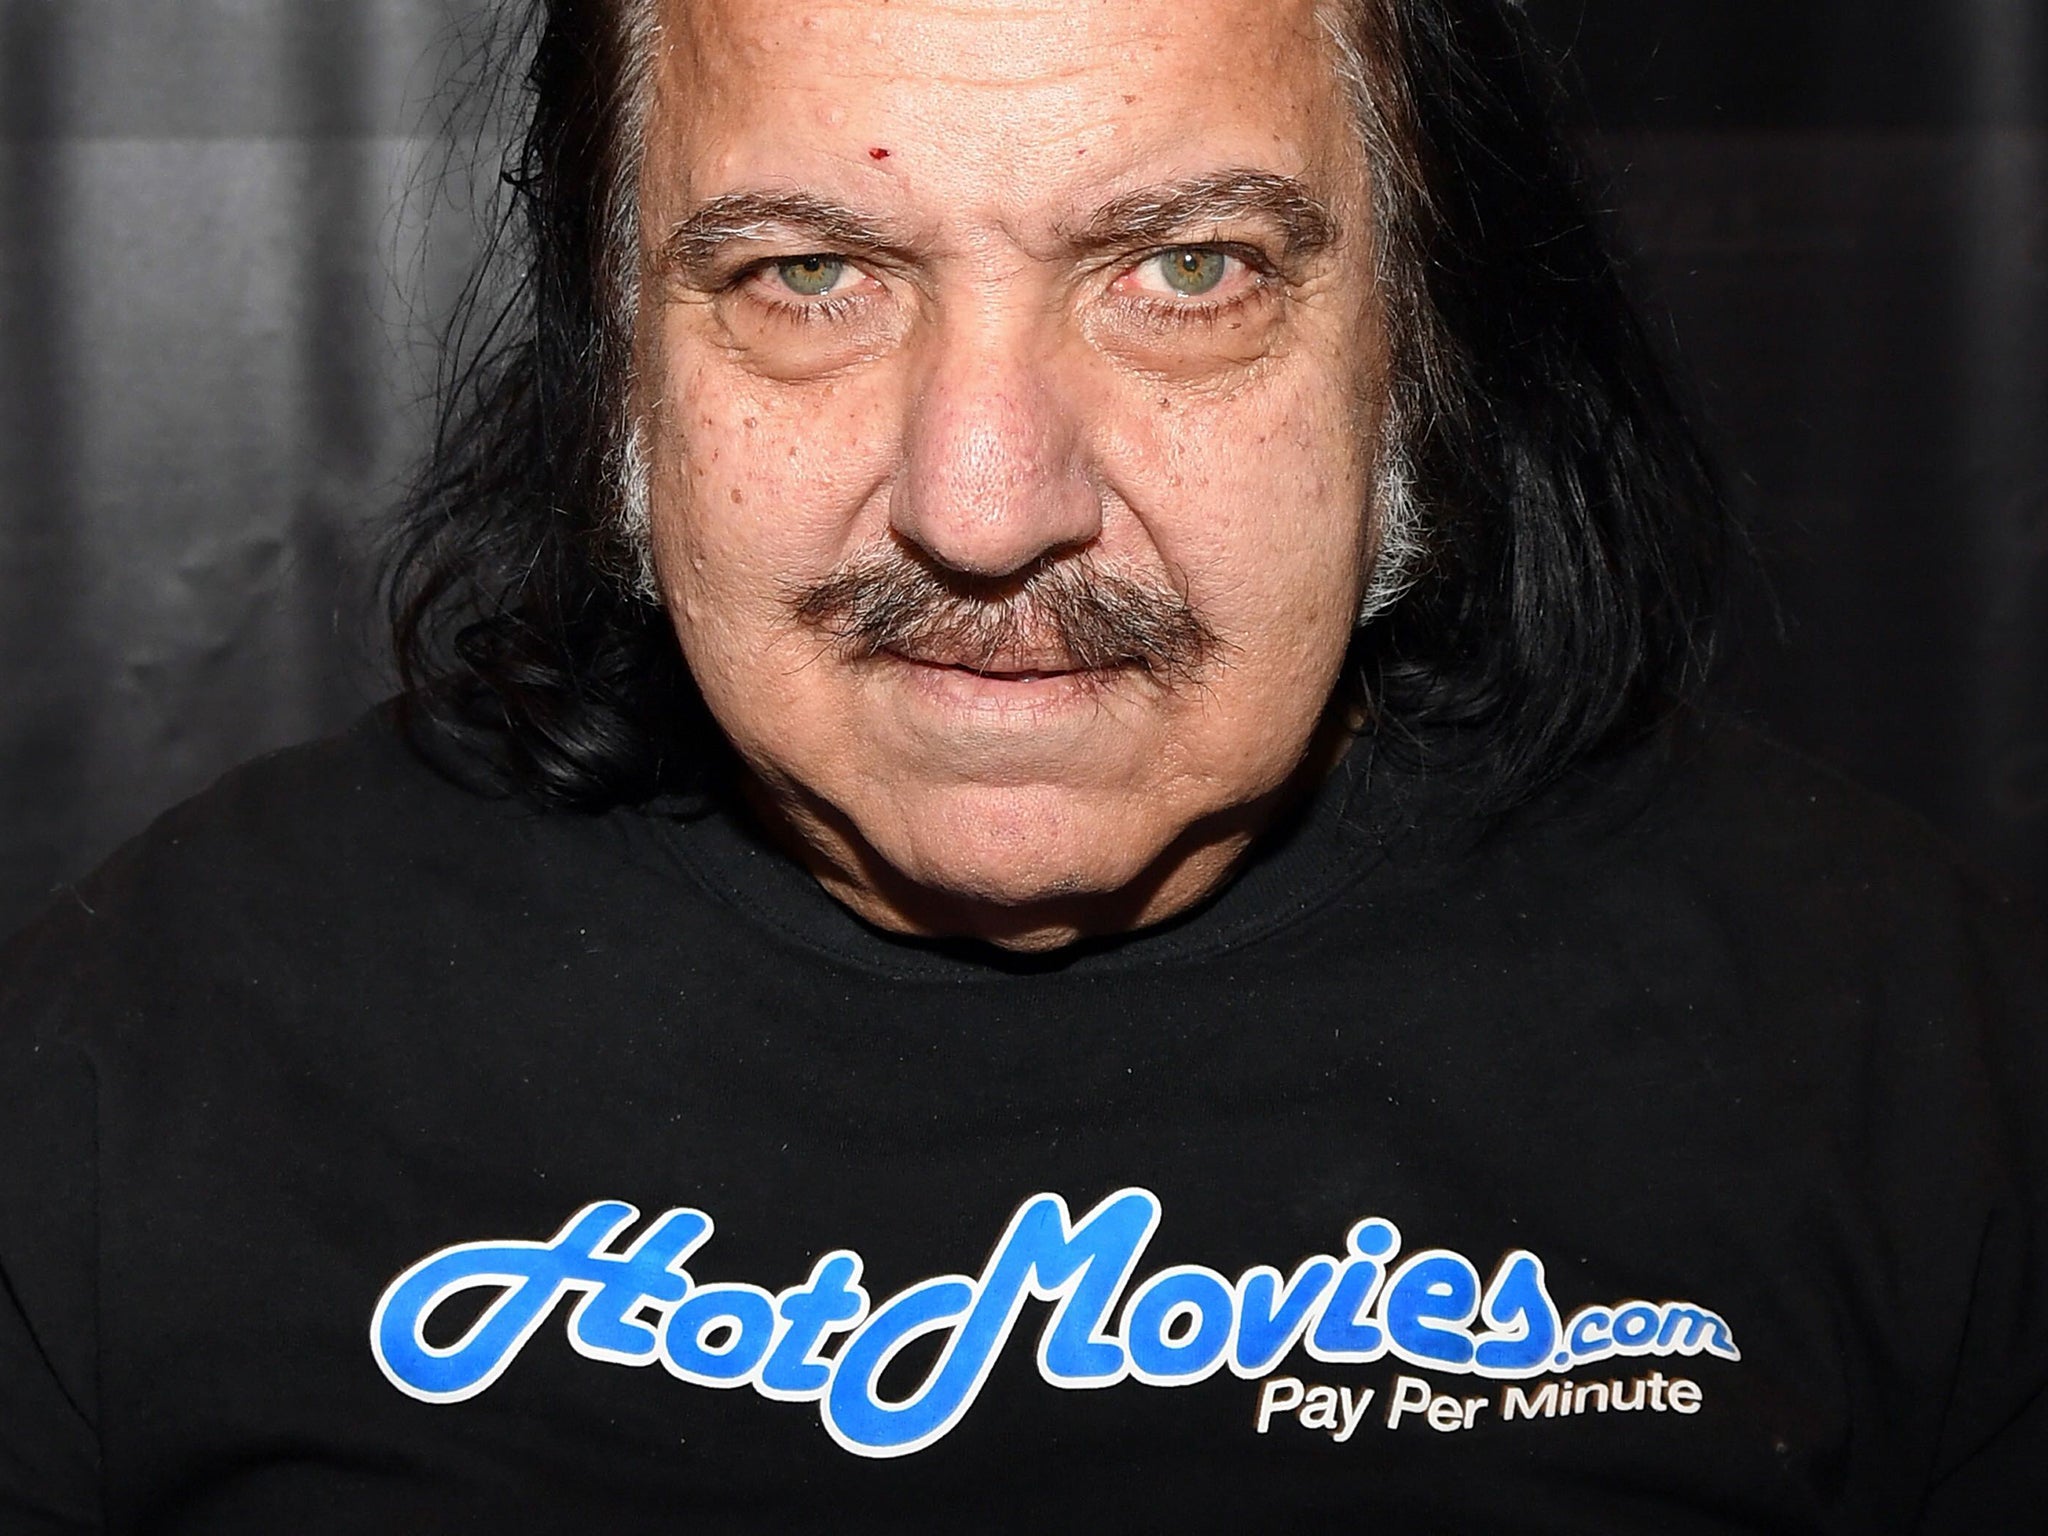 The disgraced pornography actor Ron Jeremy